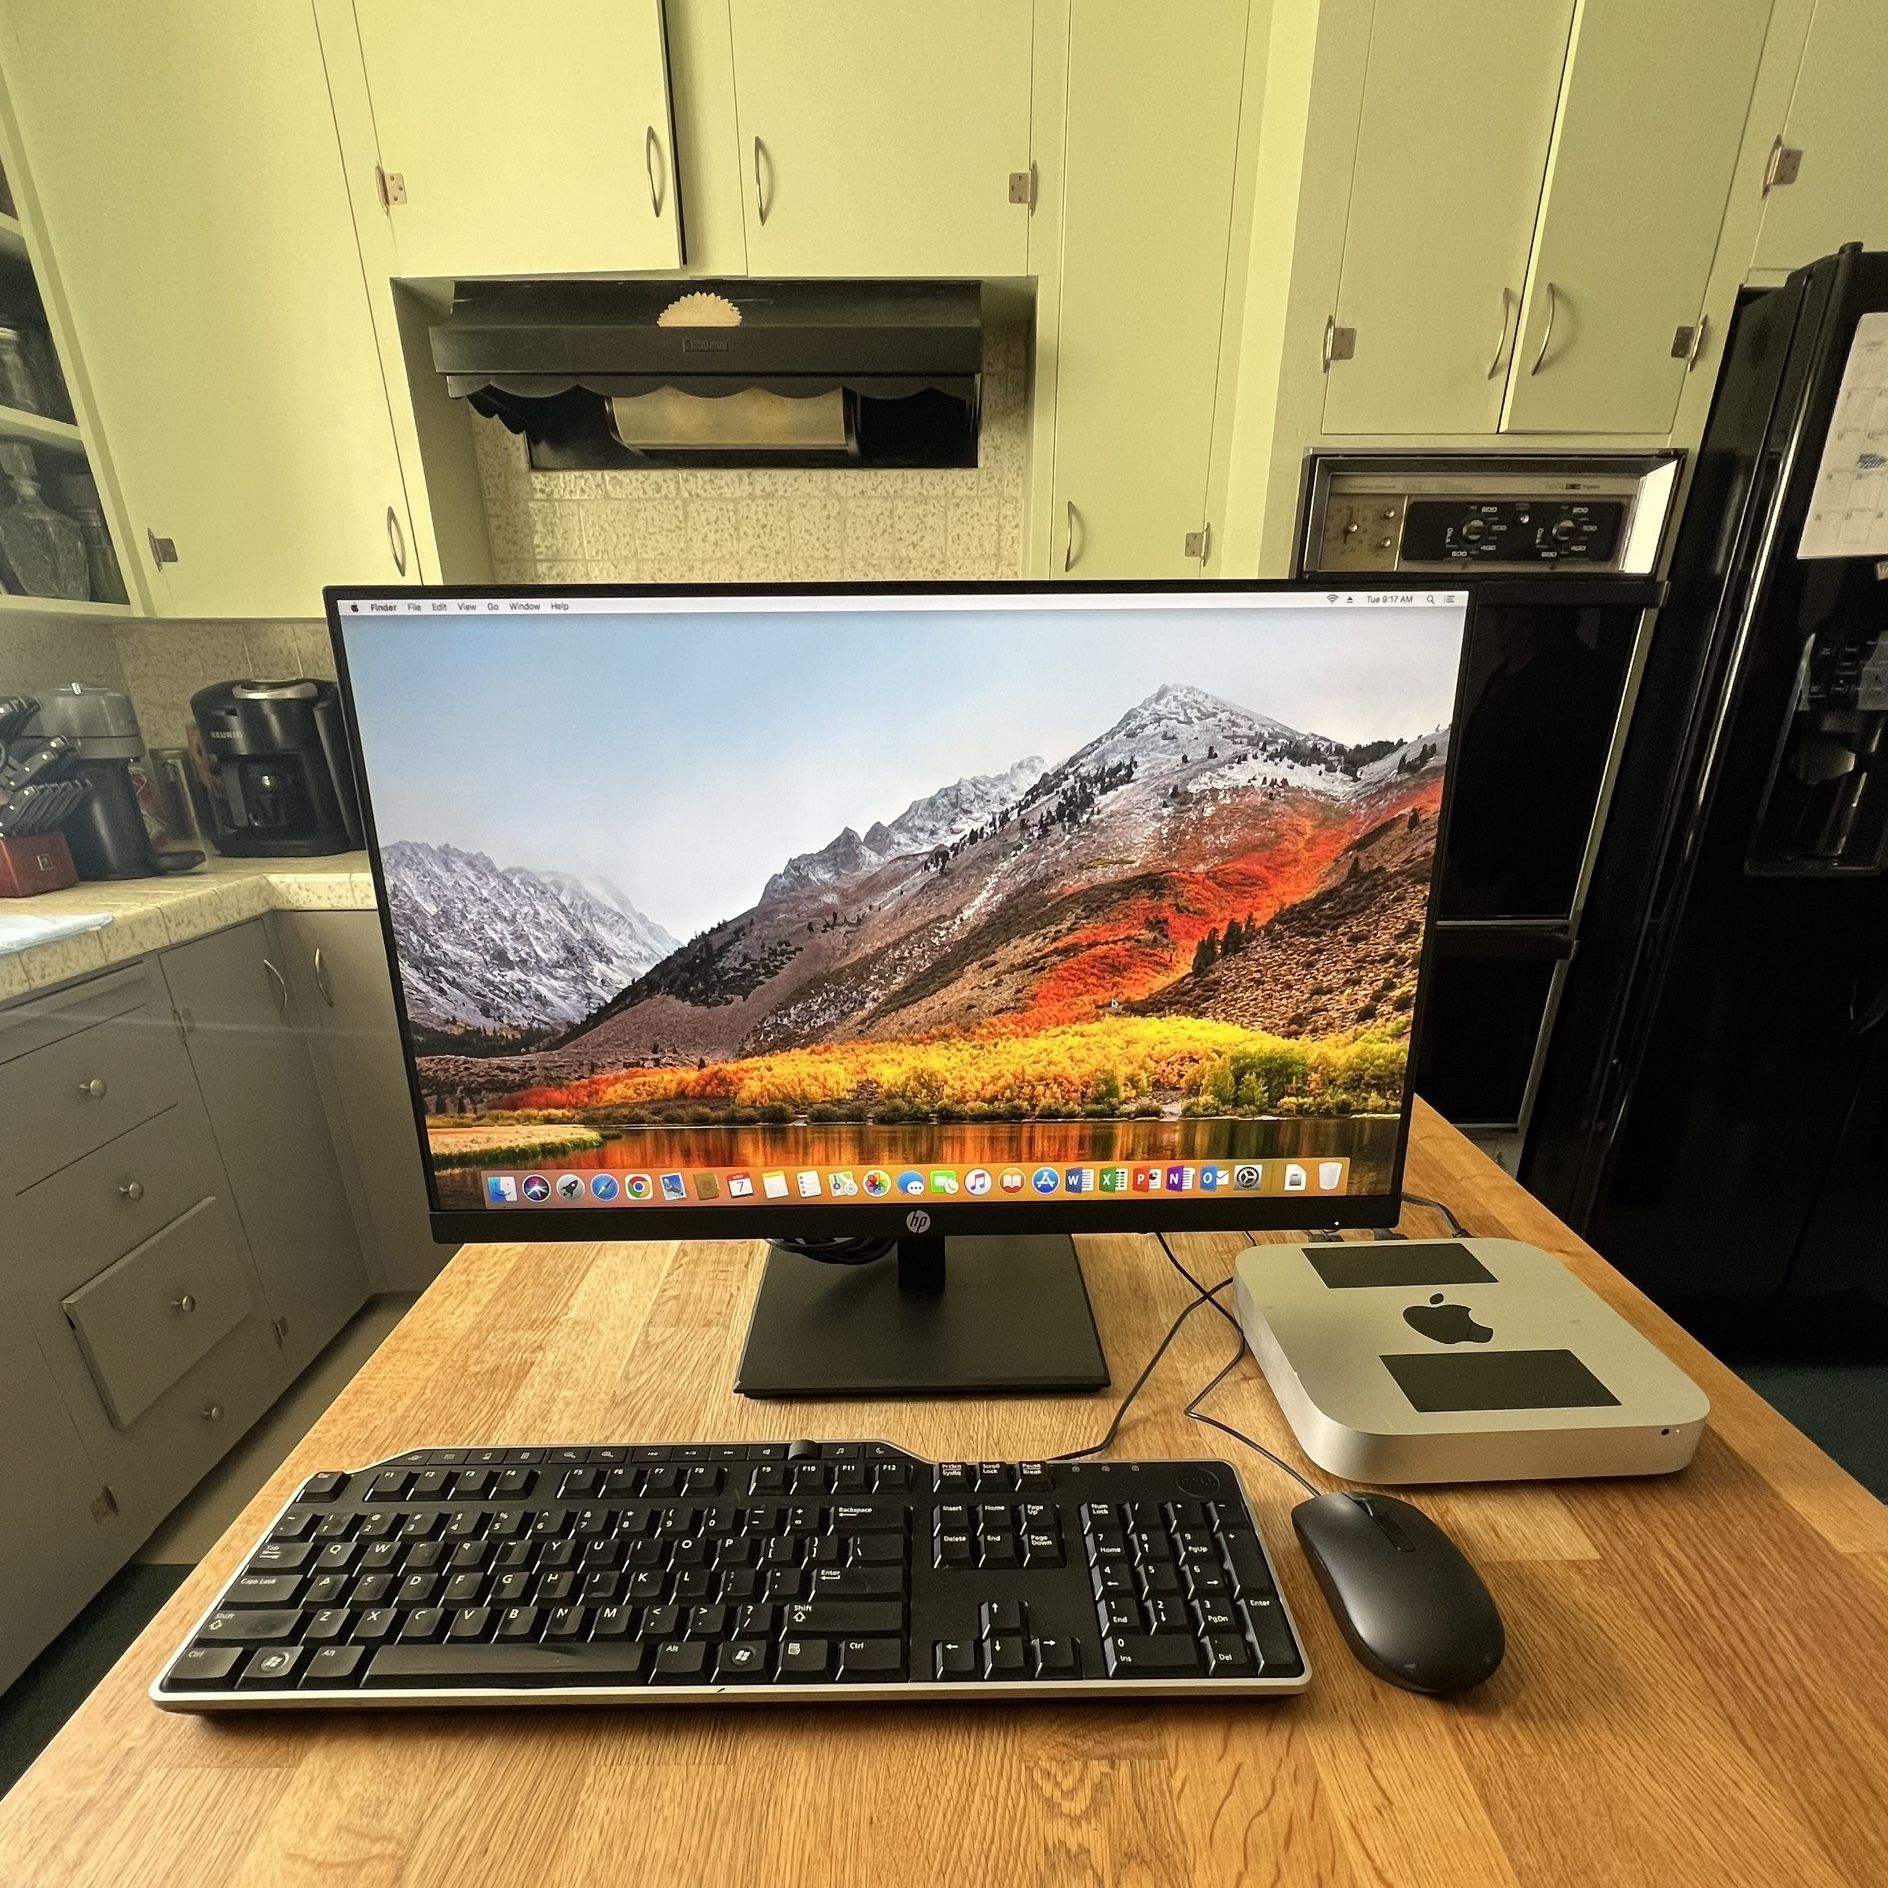 Apple Mac Mini Late 2012 With HP Monitor, Keyboard And Mouse - Intel i5 / 8GB Memory / 500GB Hard Drive / MS Office Installed 